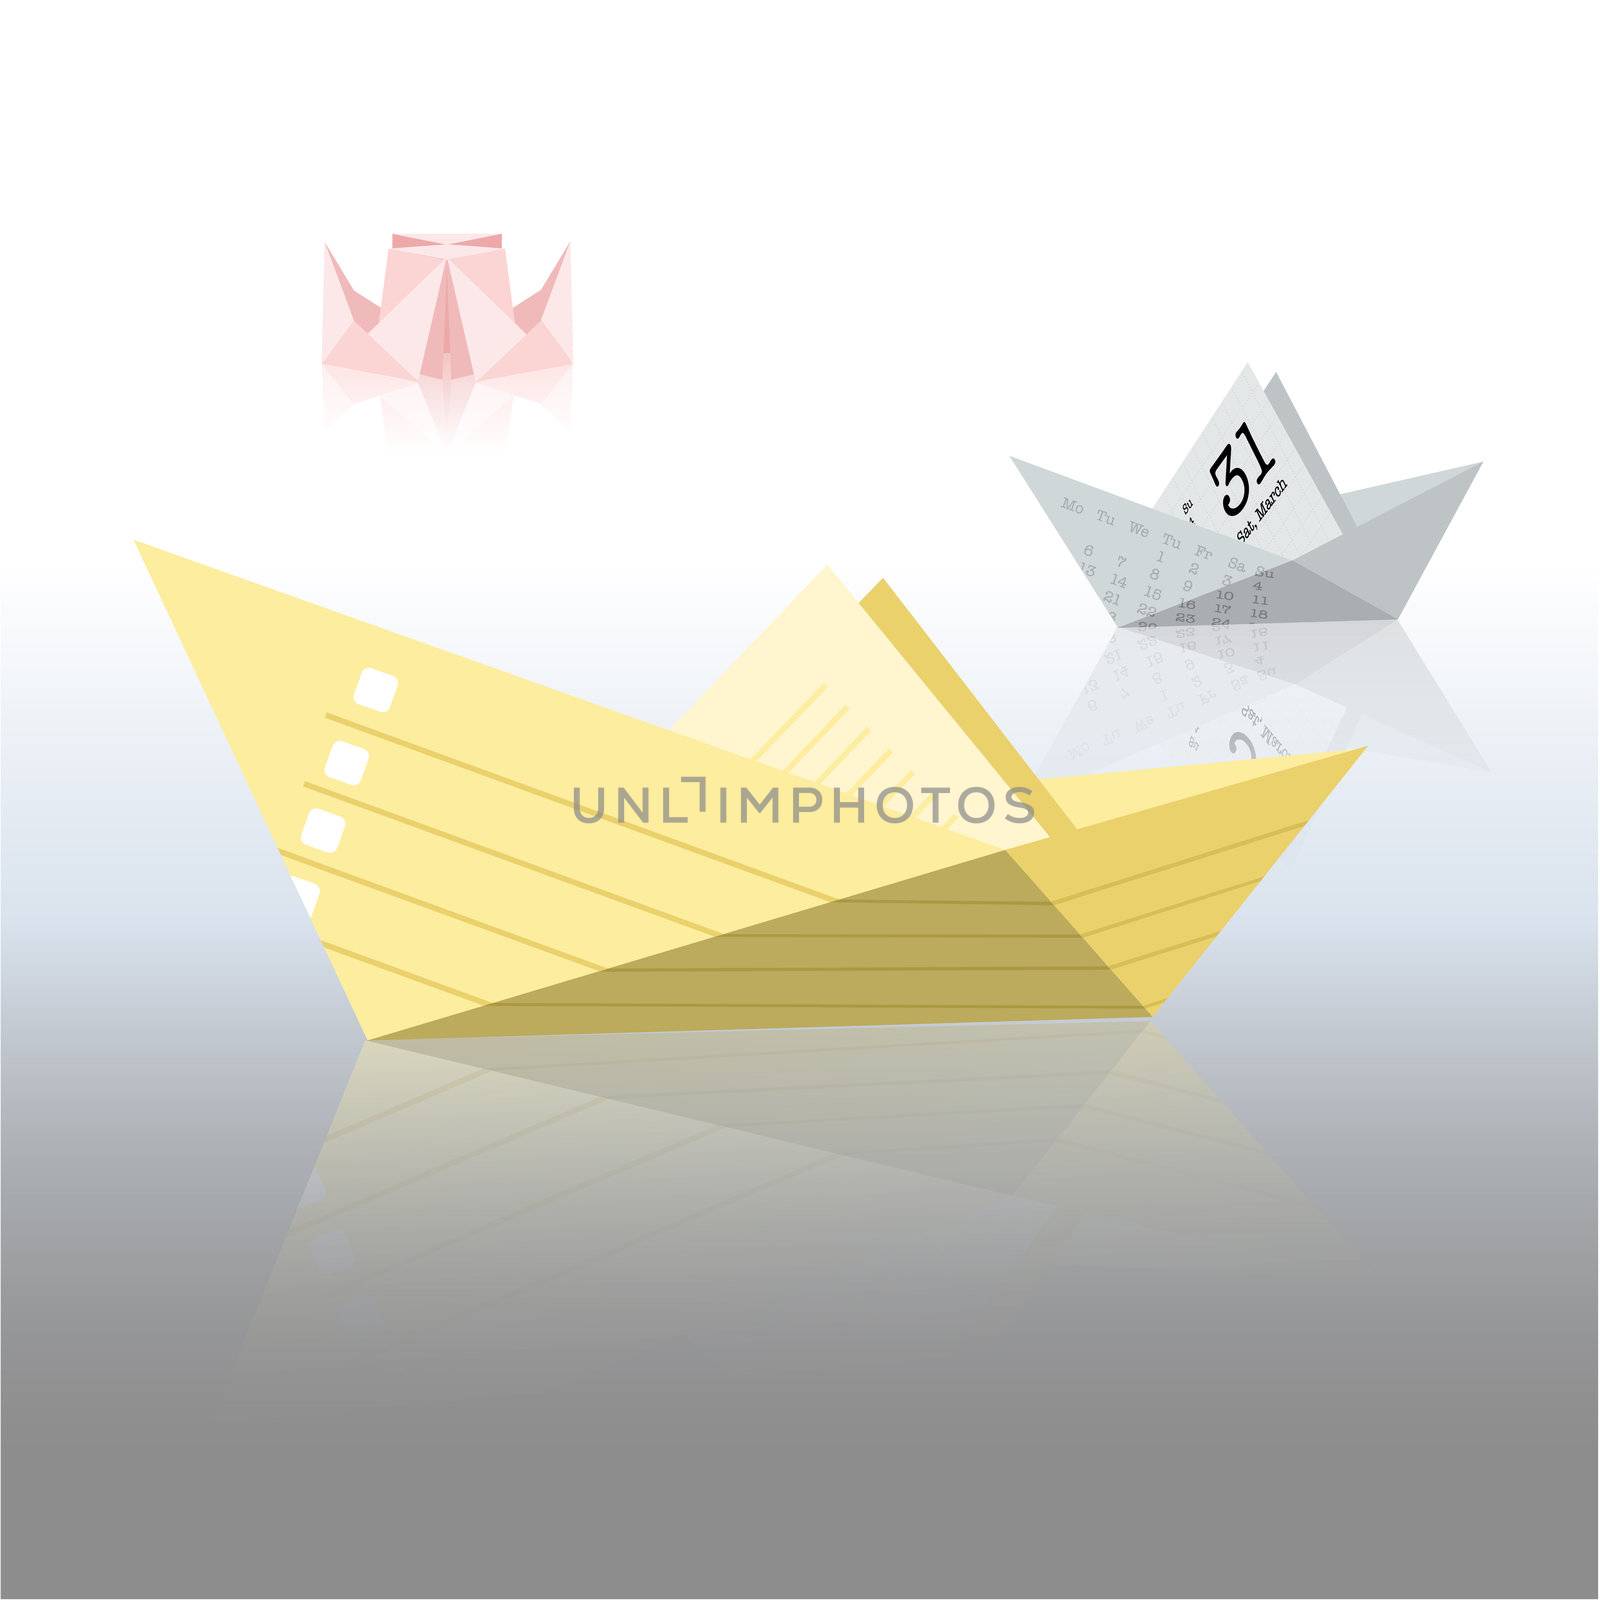 Different types of paper boats made of different paper types on a glossy surface - yellow personal todo list boat, gray calendar yacht and pink steamboat of family needs.